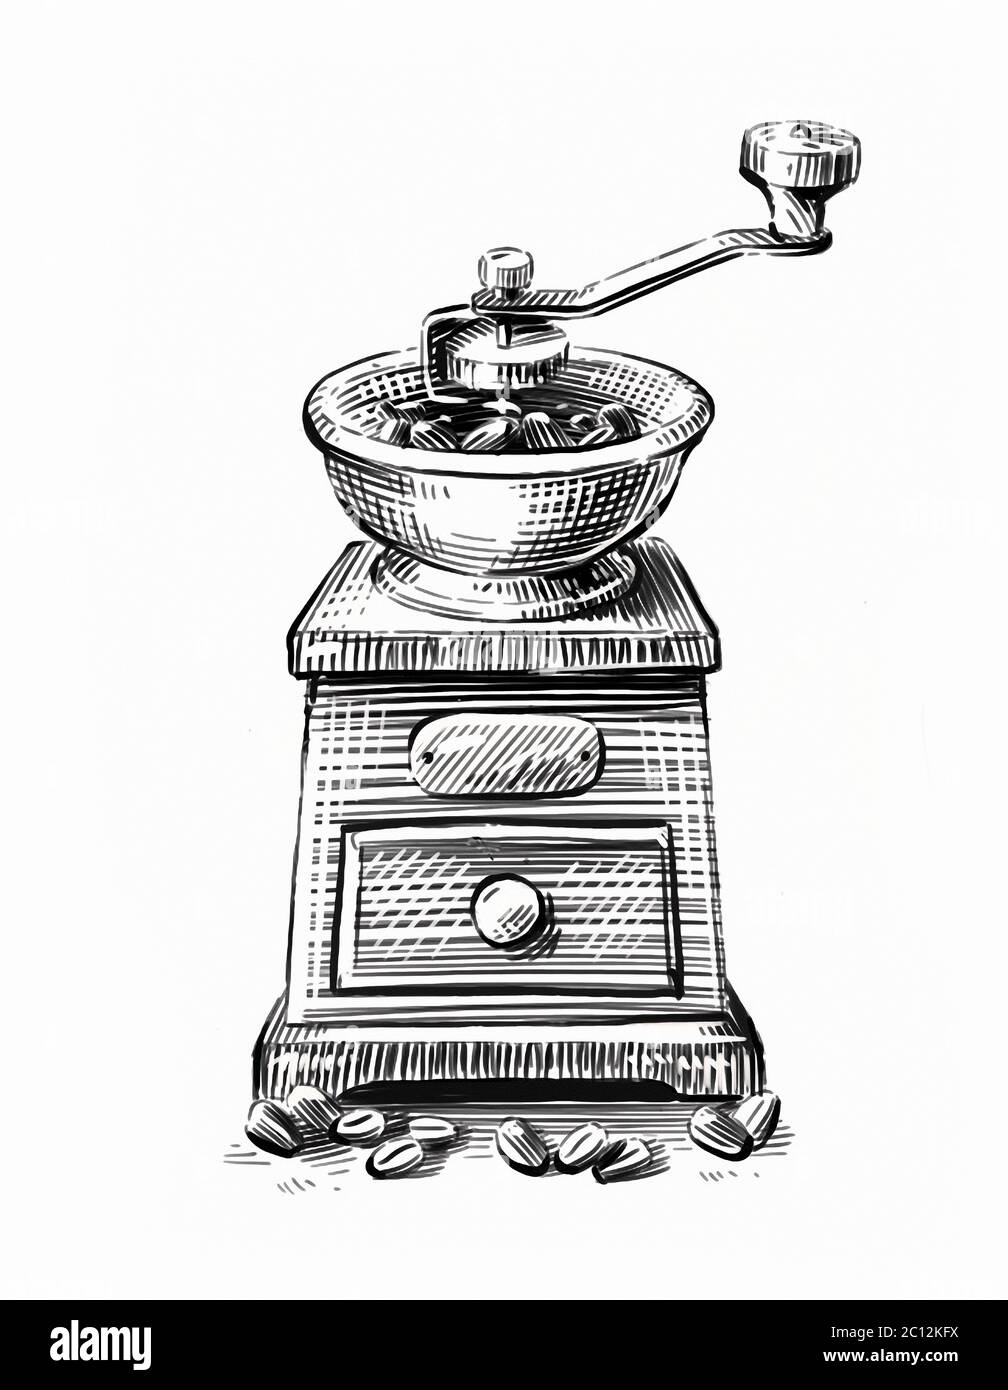 Hand-drawn sketch coffee grinder isolated on white background Stock Photo